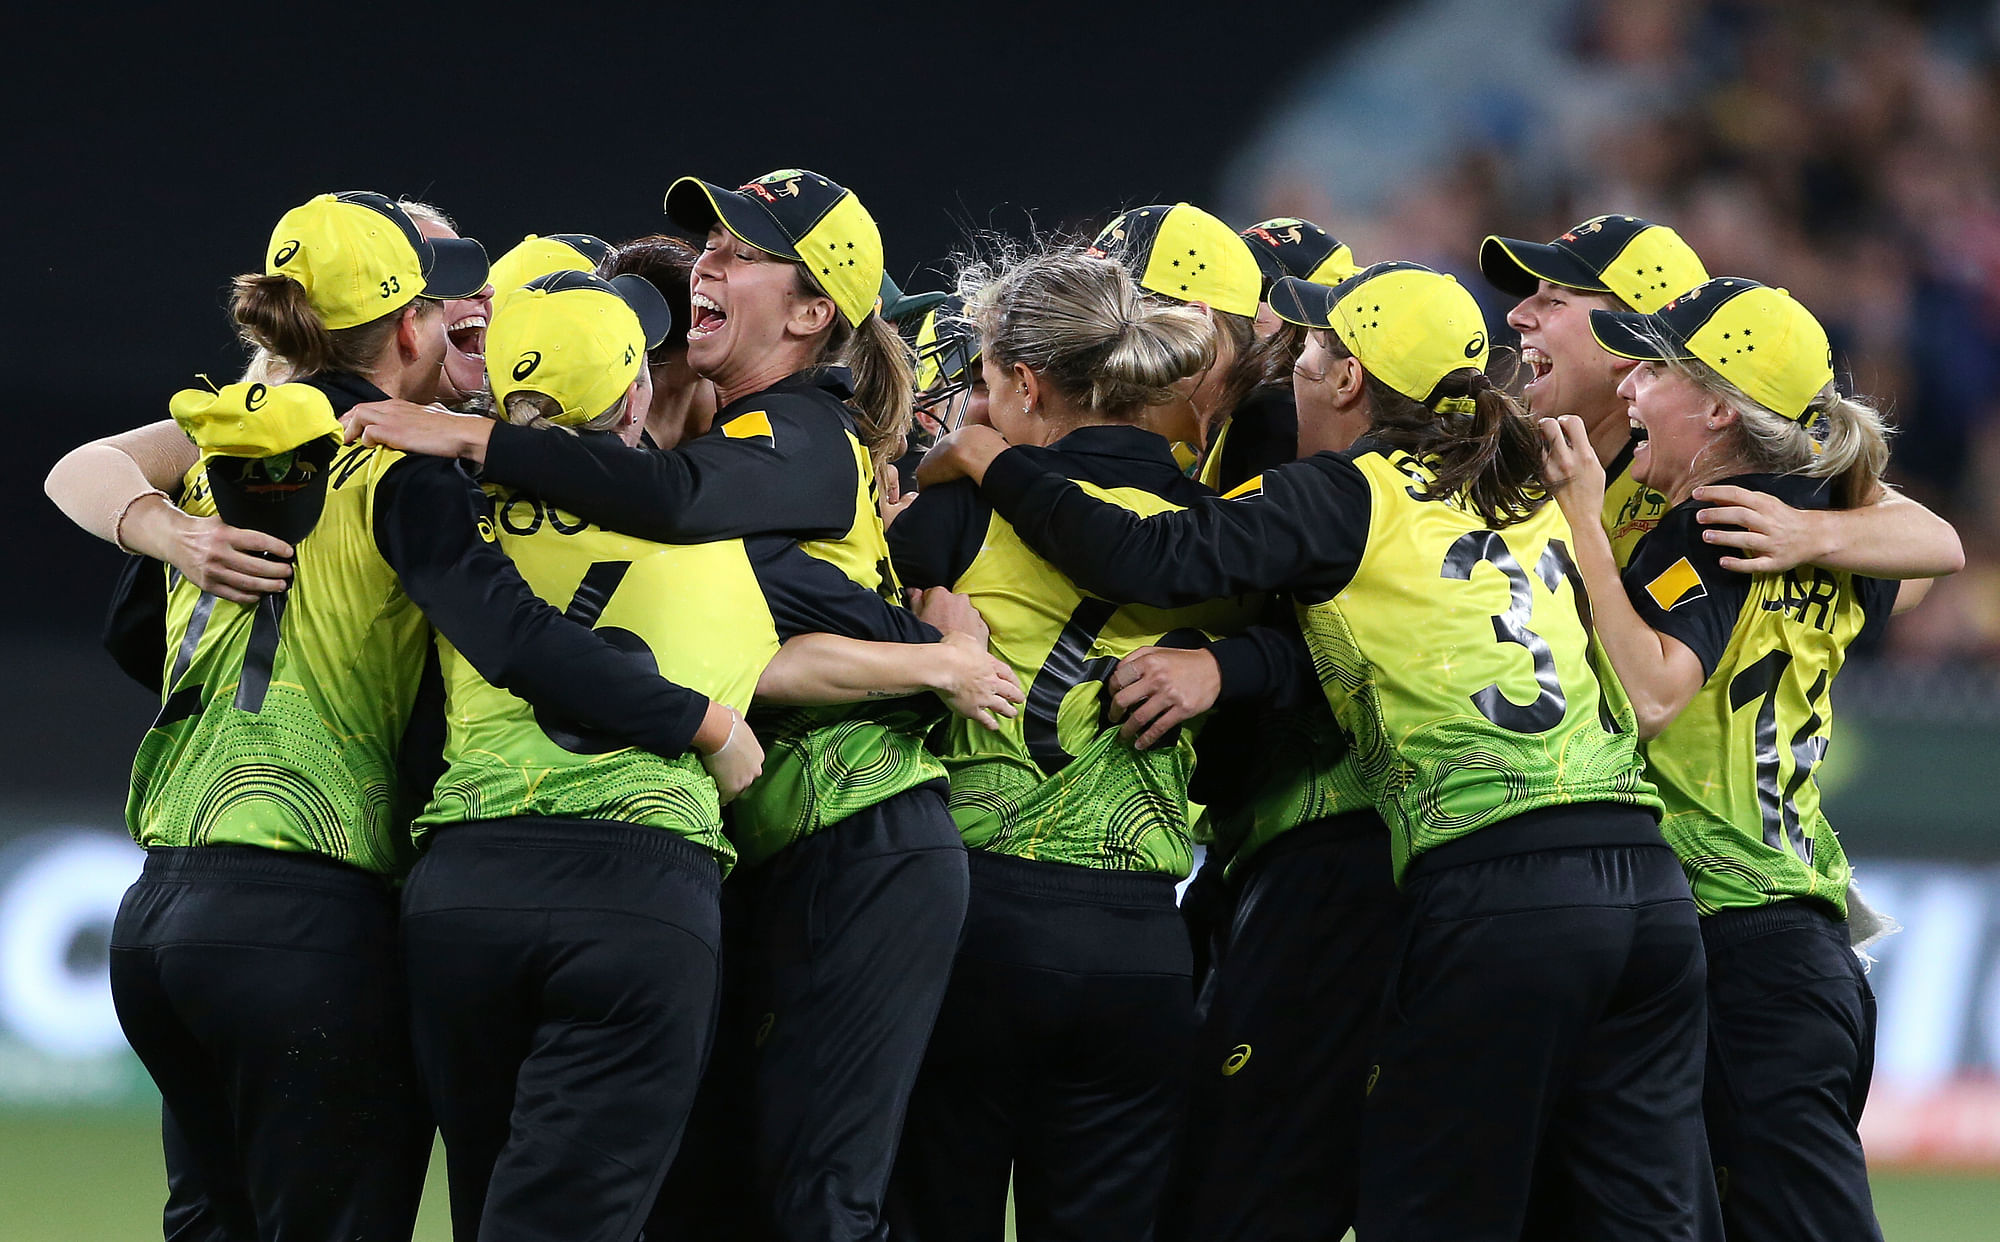 Australian players celebrate after defeating India in the Women’s T20 World Cup cricket final match in Melbourne, Sunday, March 8, 2020.&nbsp;